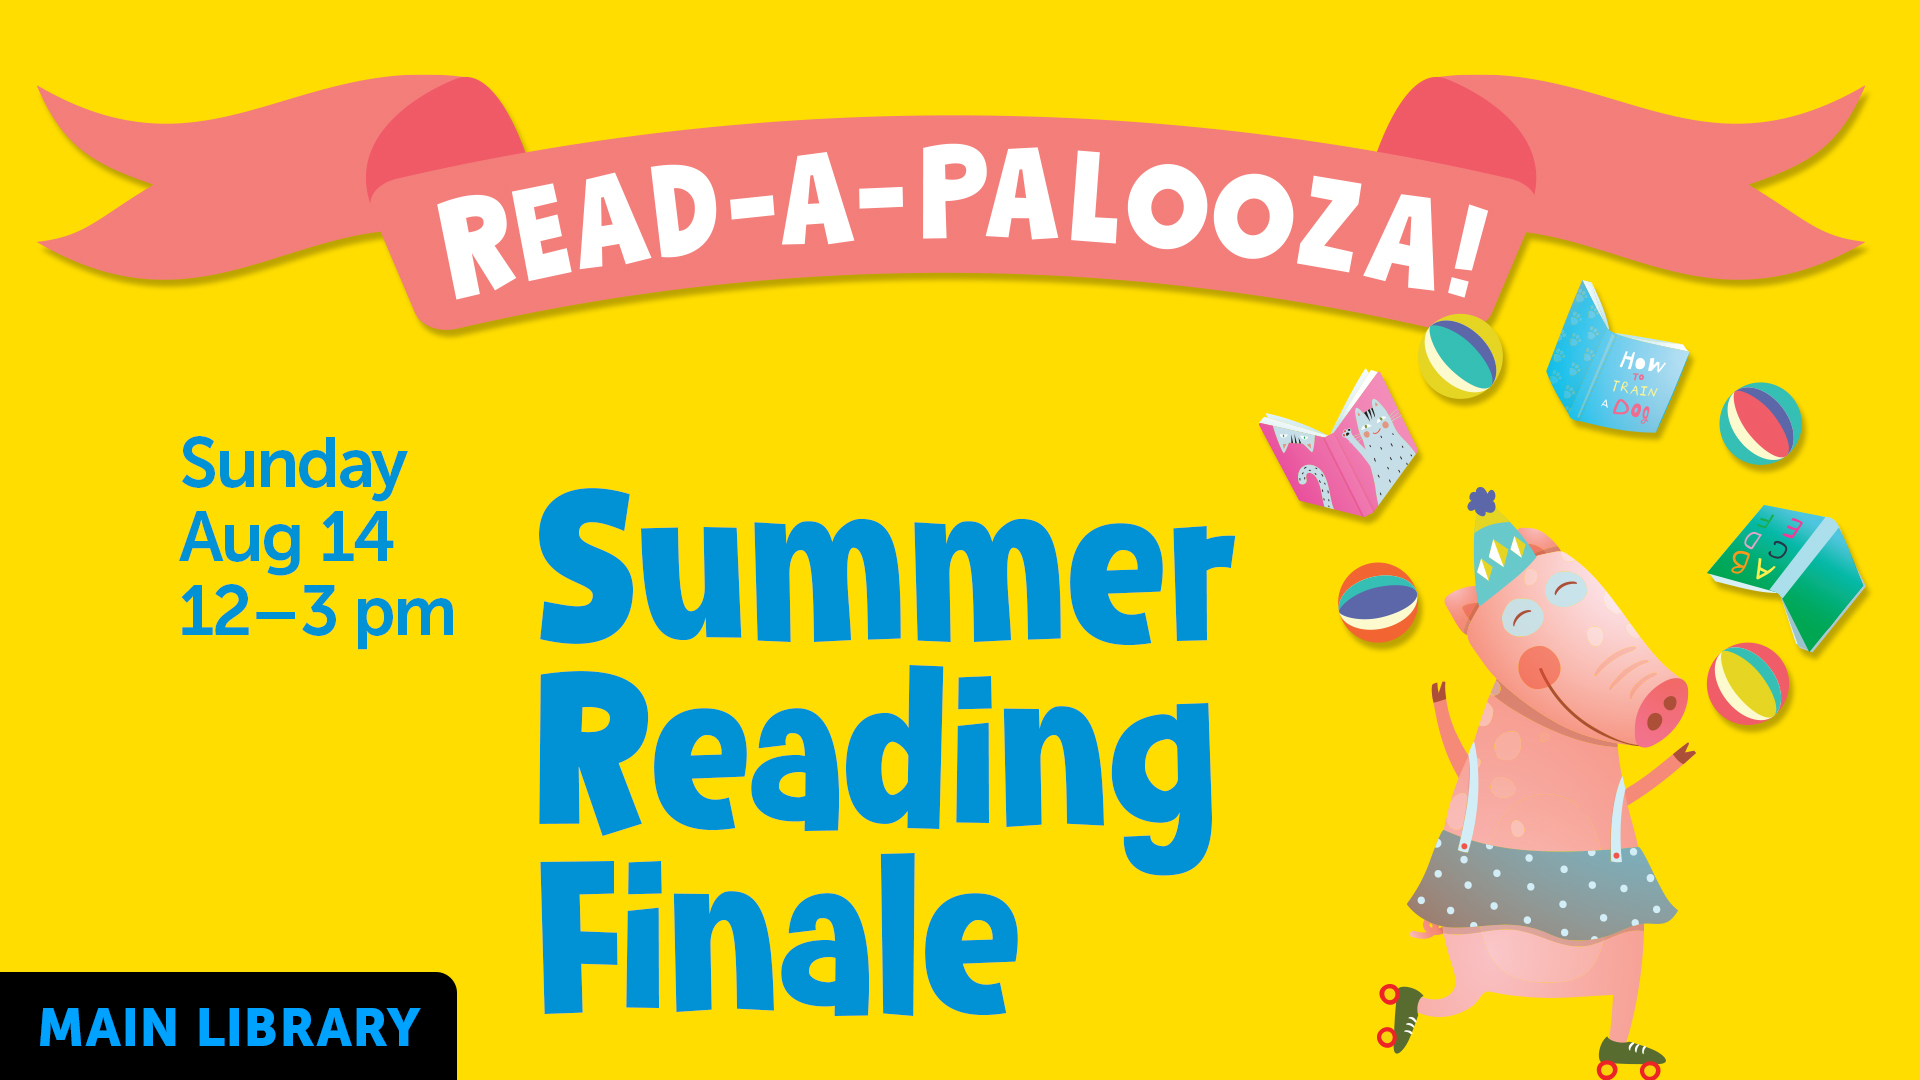 pig character juggling books, Read-a-palooza Summer Reading Finale event details